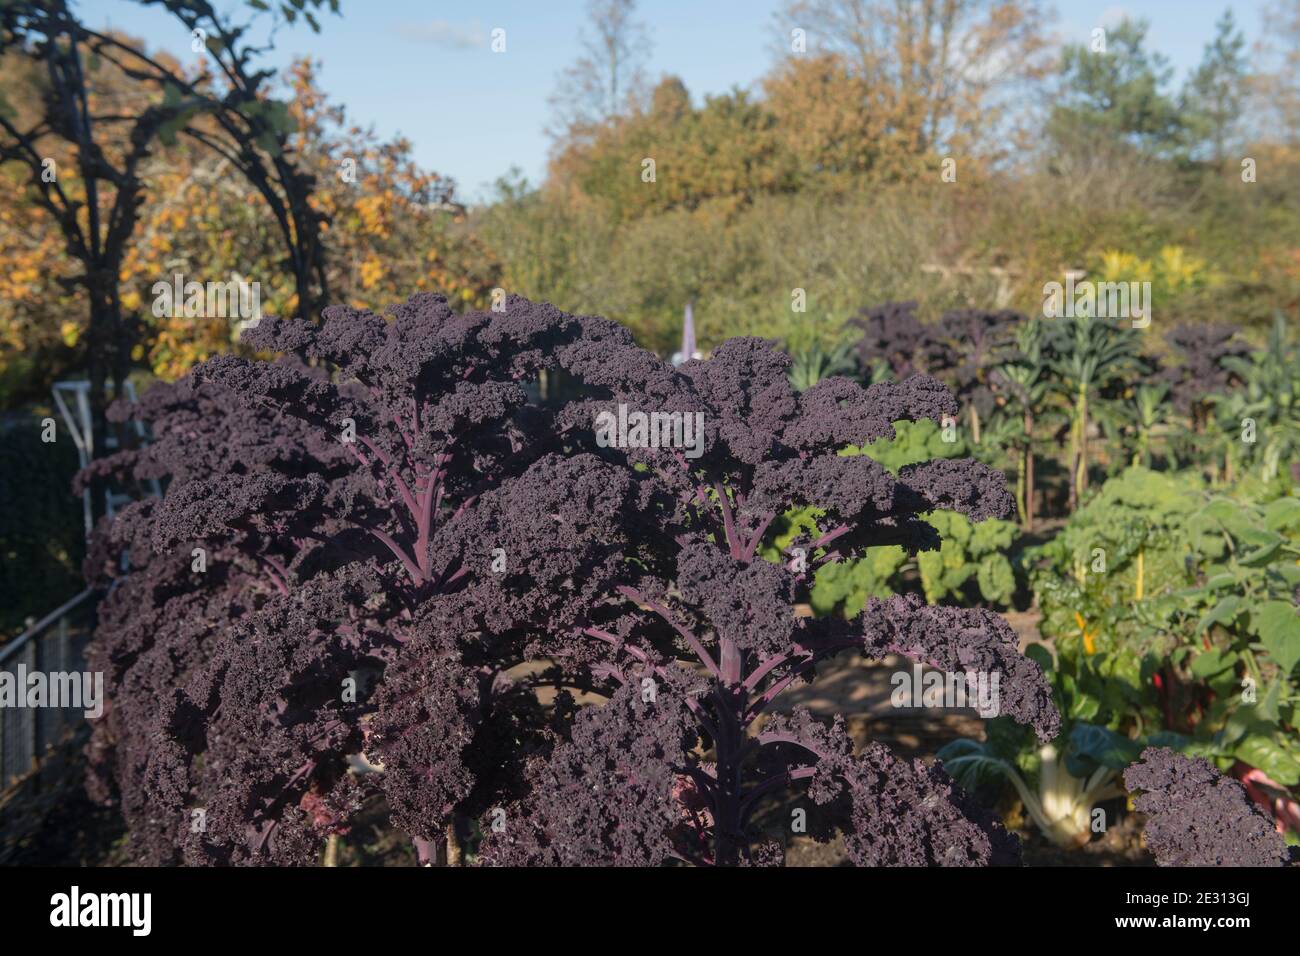 Autumn Crop of Home Grown Organic Purple Leaved Redbor Kale (Brassica oleracea 'Acephala Group') Growing on an Allotment in a Vegetable Garden Stock Photo